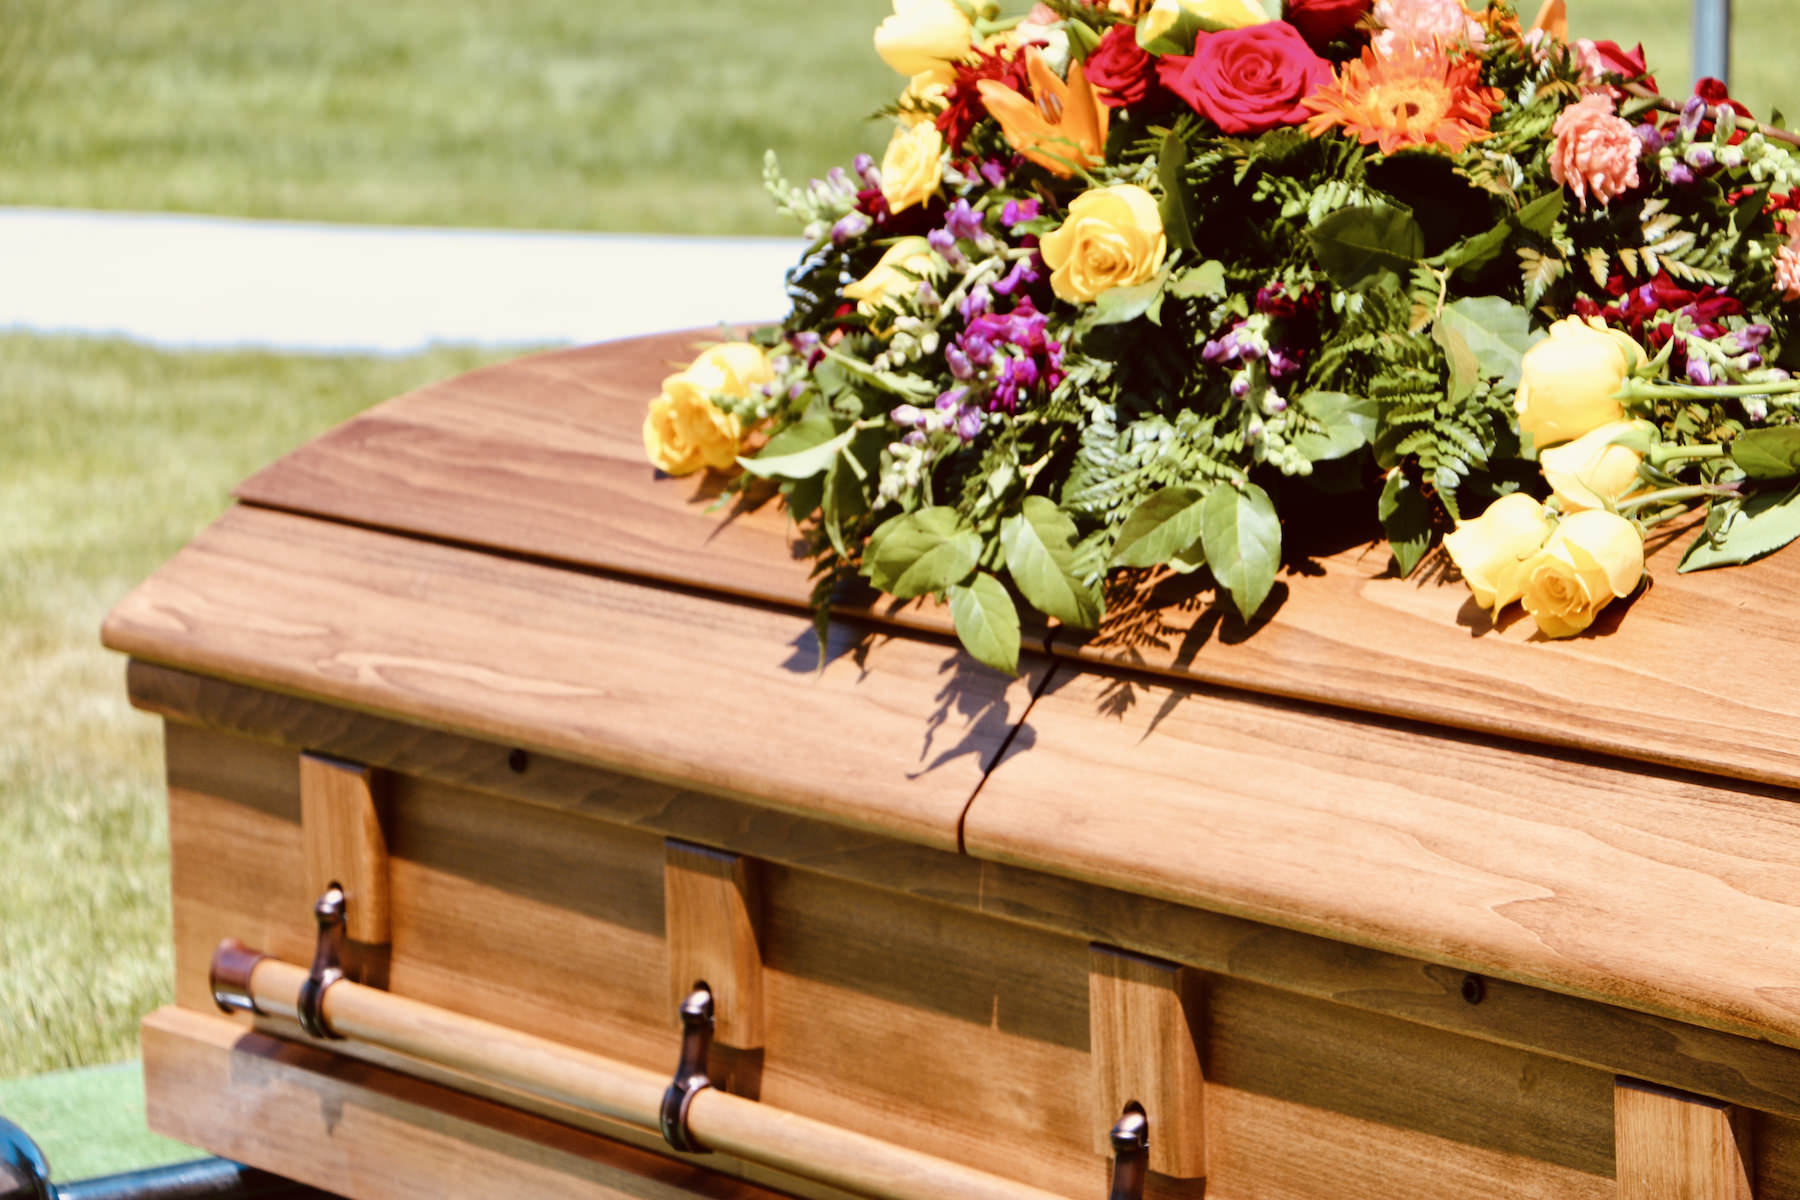 Lovely floral arrangement on wood casket. Mourning loss of loved one. Death of friend or family member. Funeral service. Saying goodbye.